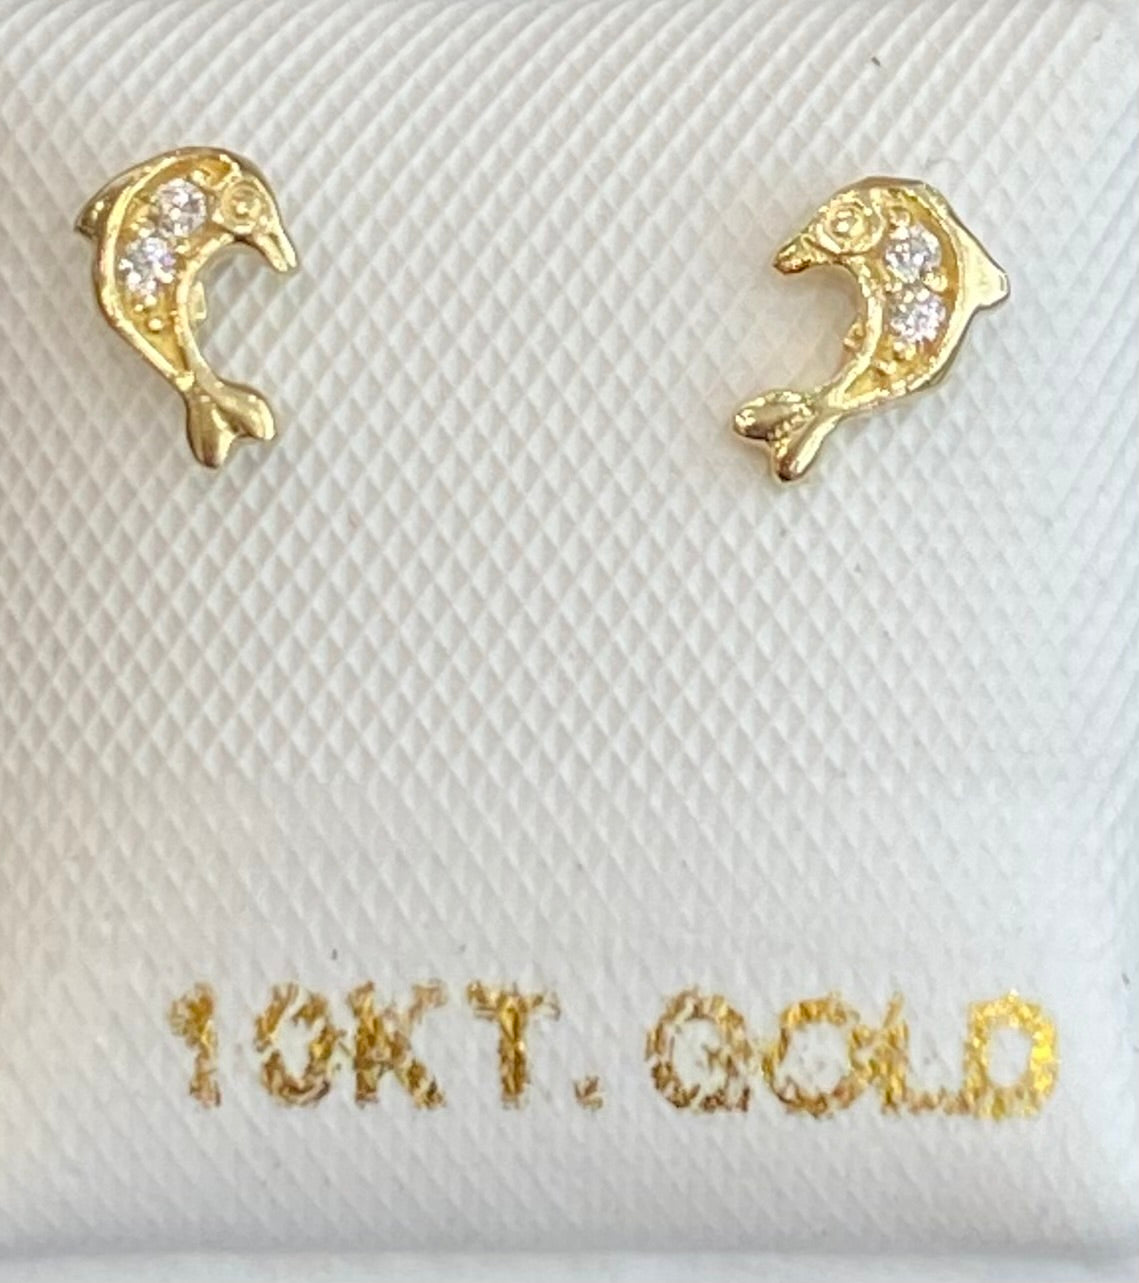 10K Yellow Gold Cubic Zirconia Dolphin Stud Earrings with Screw Backs - 5.75 x 4.0mm